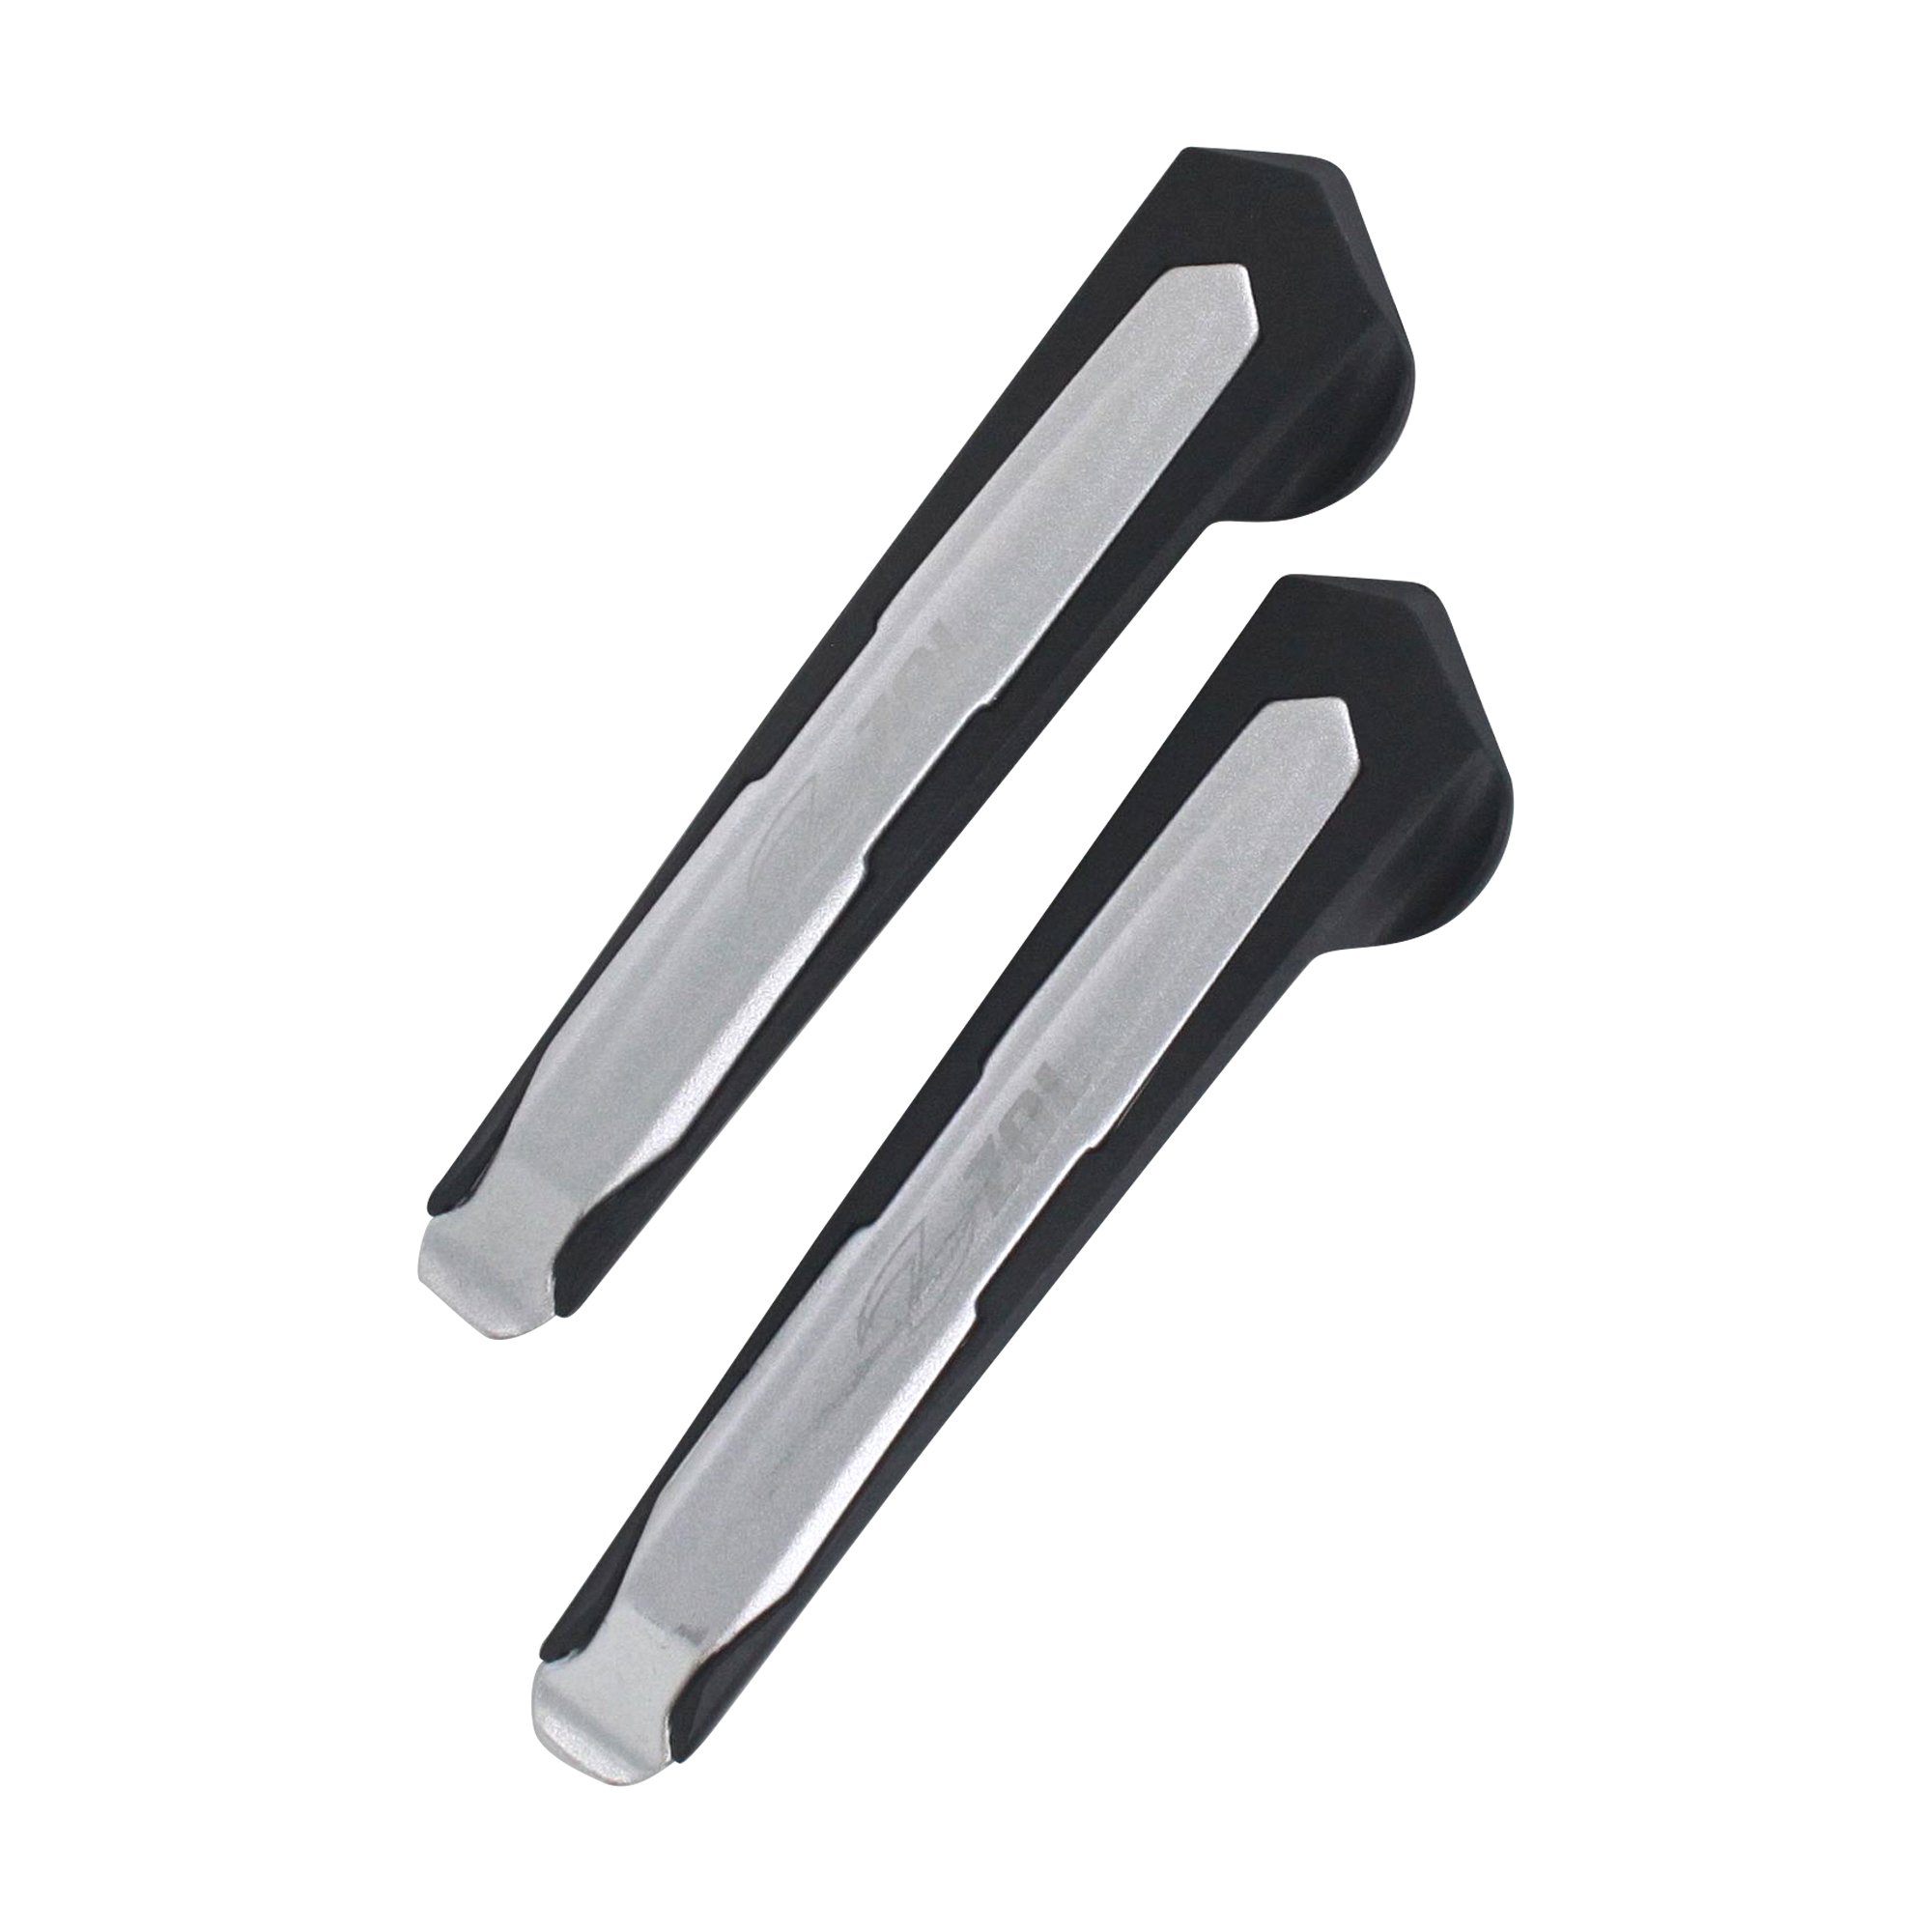 New Atozi Aluminum Alloy bicycle tire tyre lever w/ rim protector tool Set of 2 